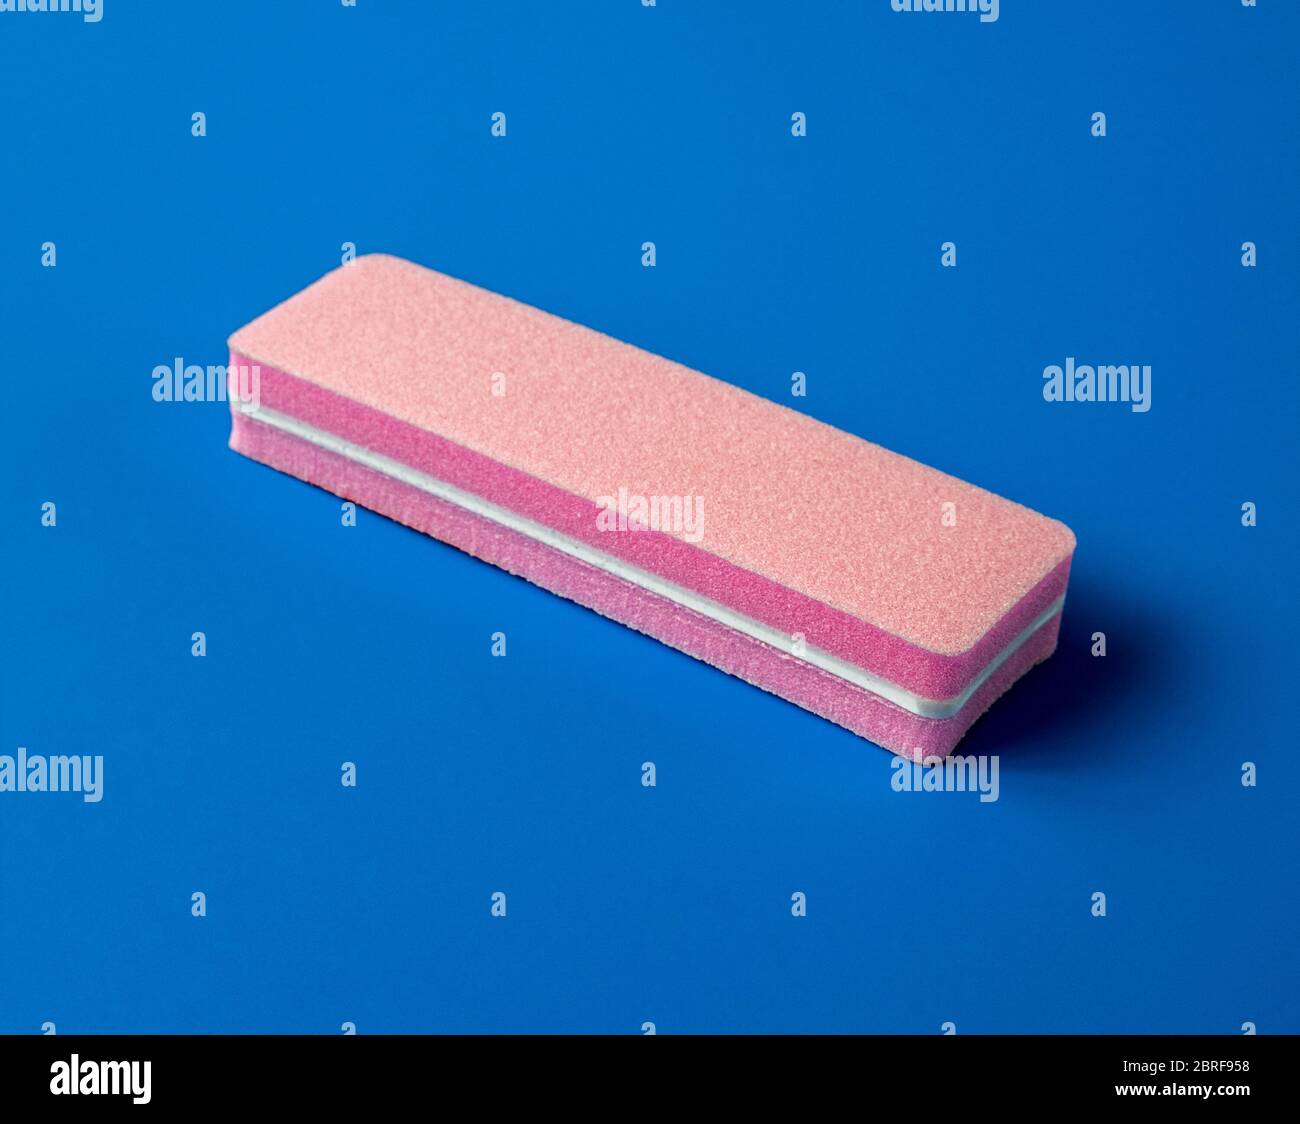 Sanding file sponge for manicure on a blue background Stock Photo